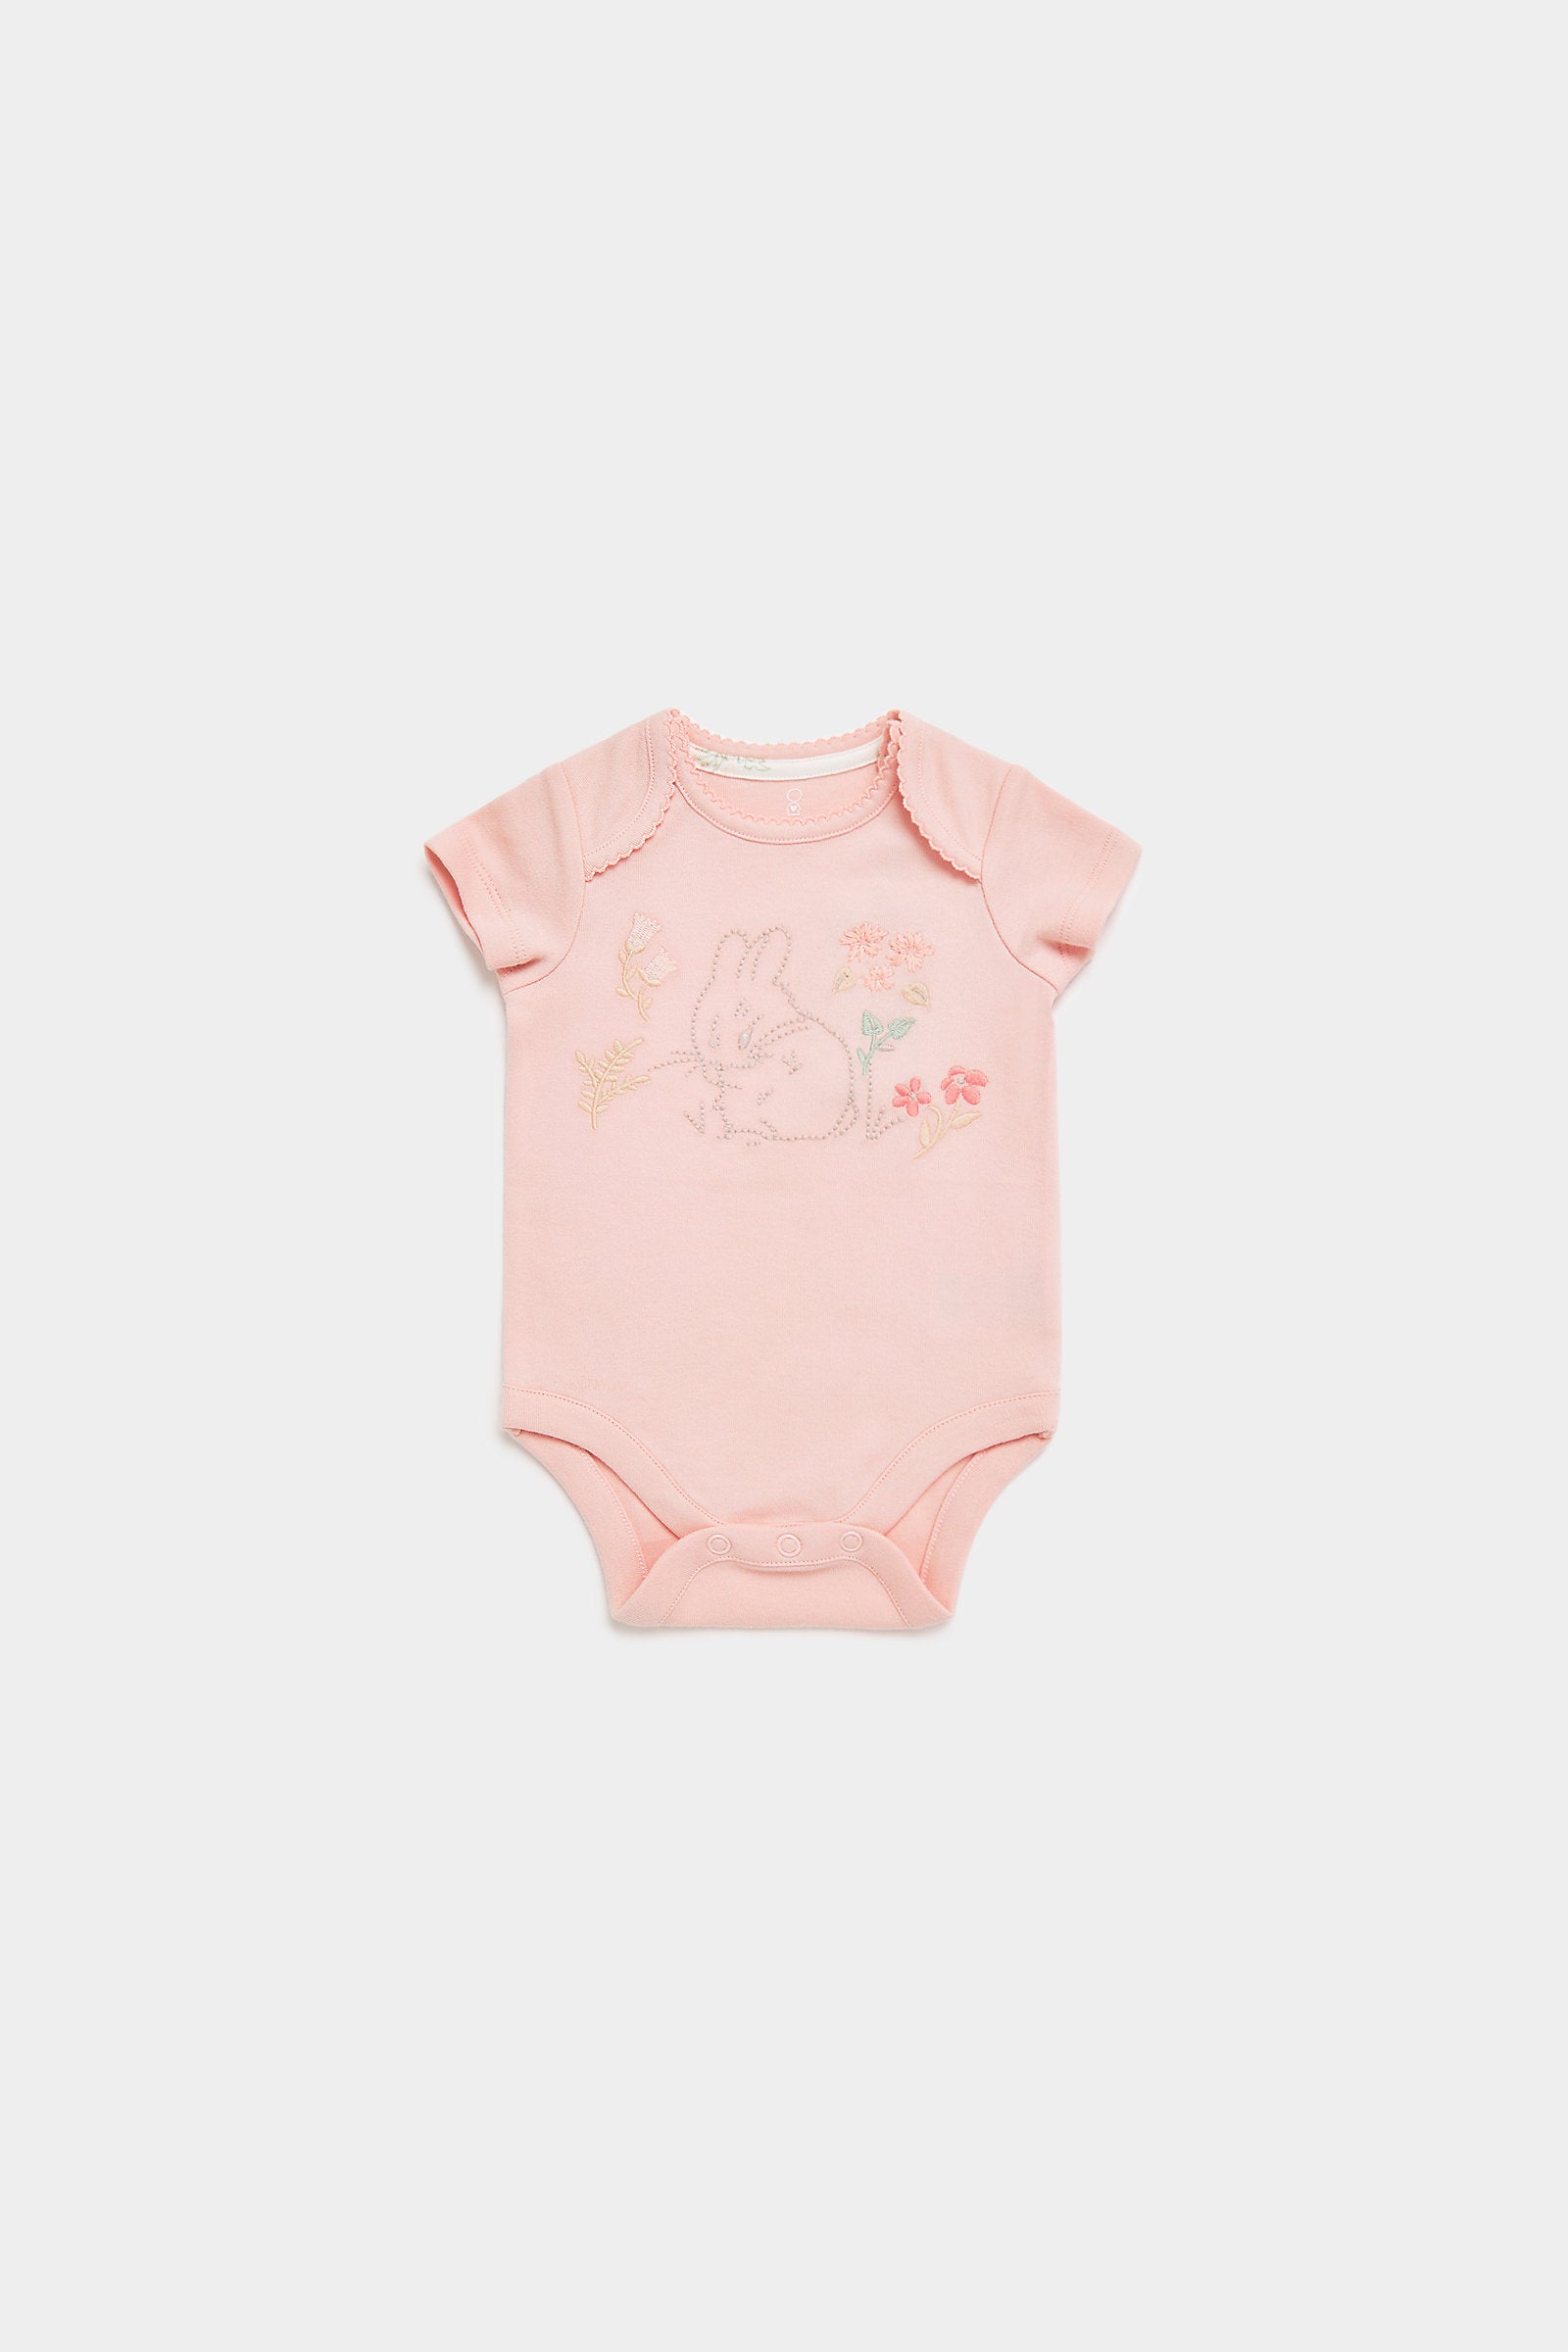 My First All-In-One, Bodysuit And Bib Set